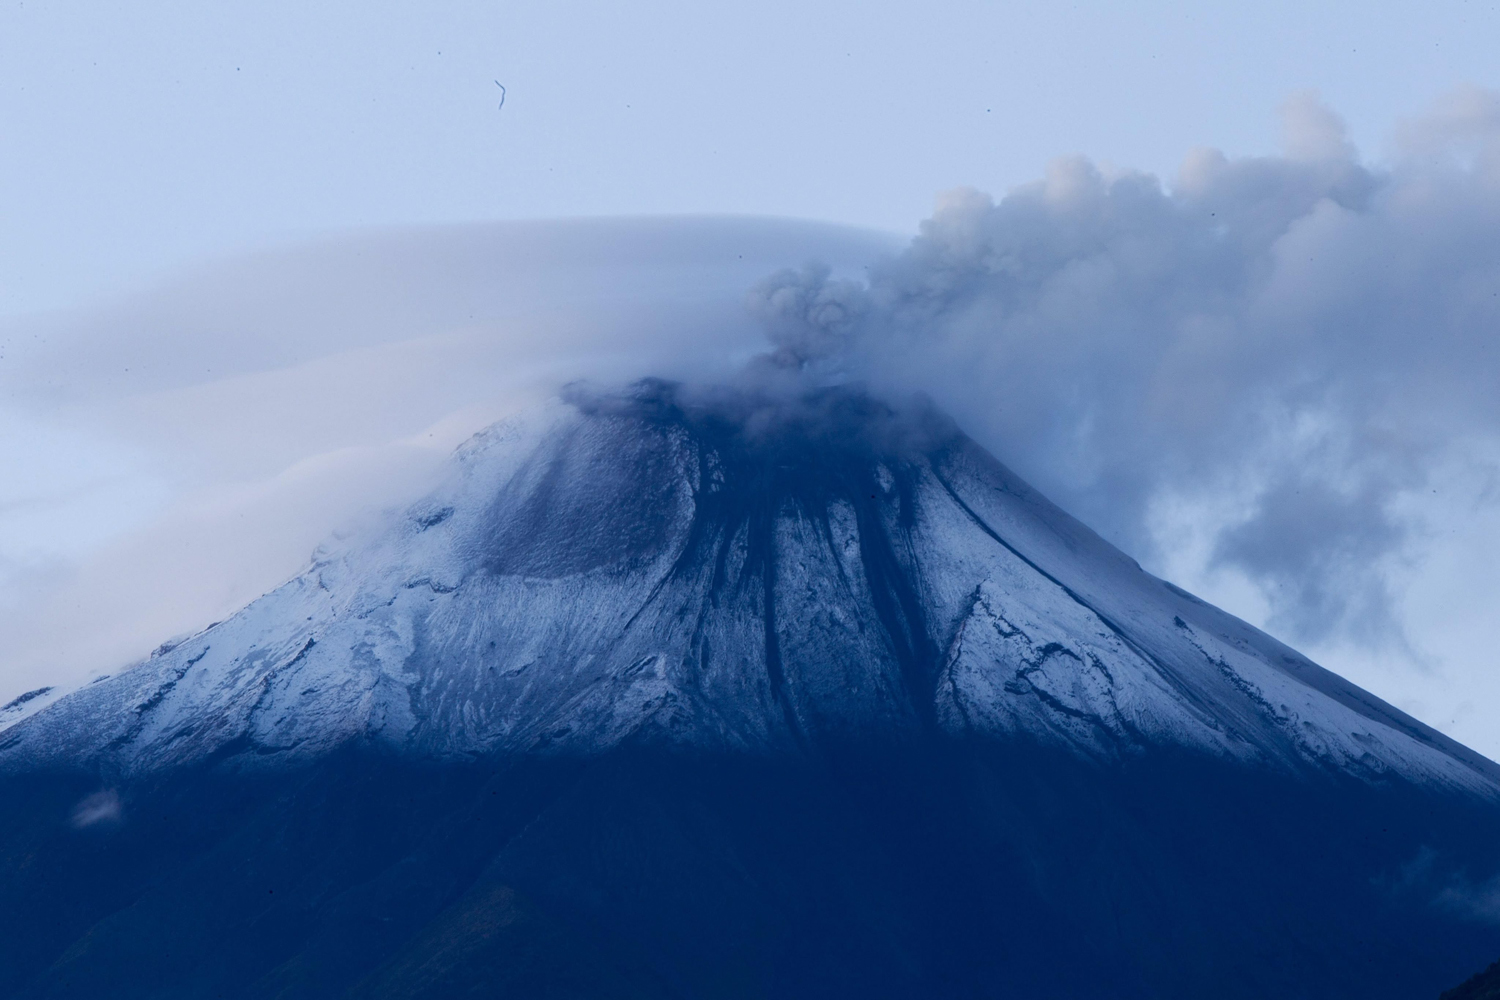 Aug. 28, 2014. View of Tungurahua volcano from the area of Guadalupe, Ecuador. The volcano has registered a moderate to high activity since the end of July.